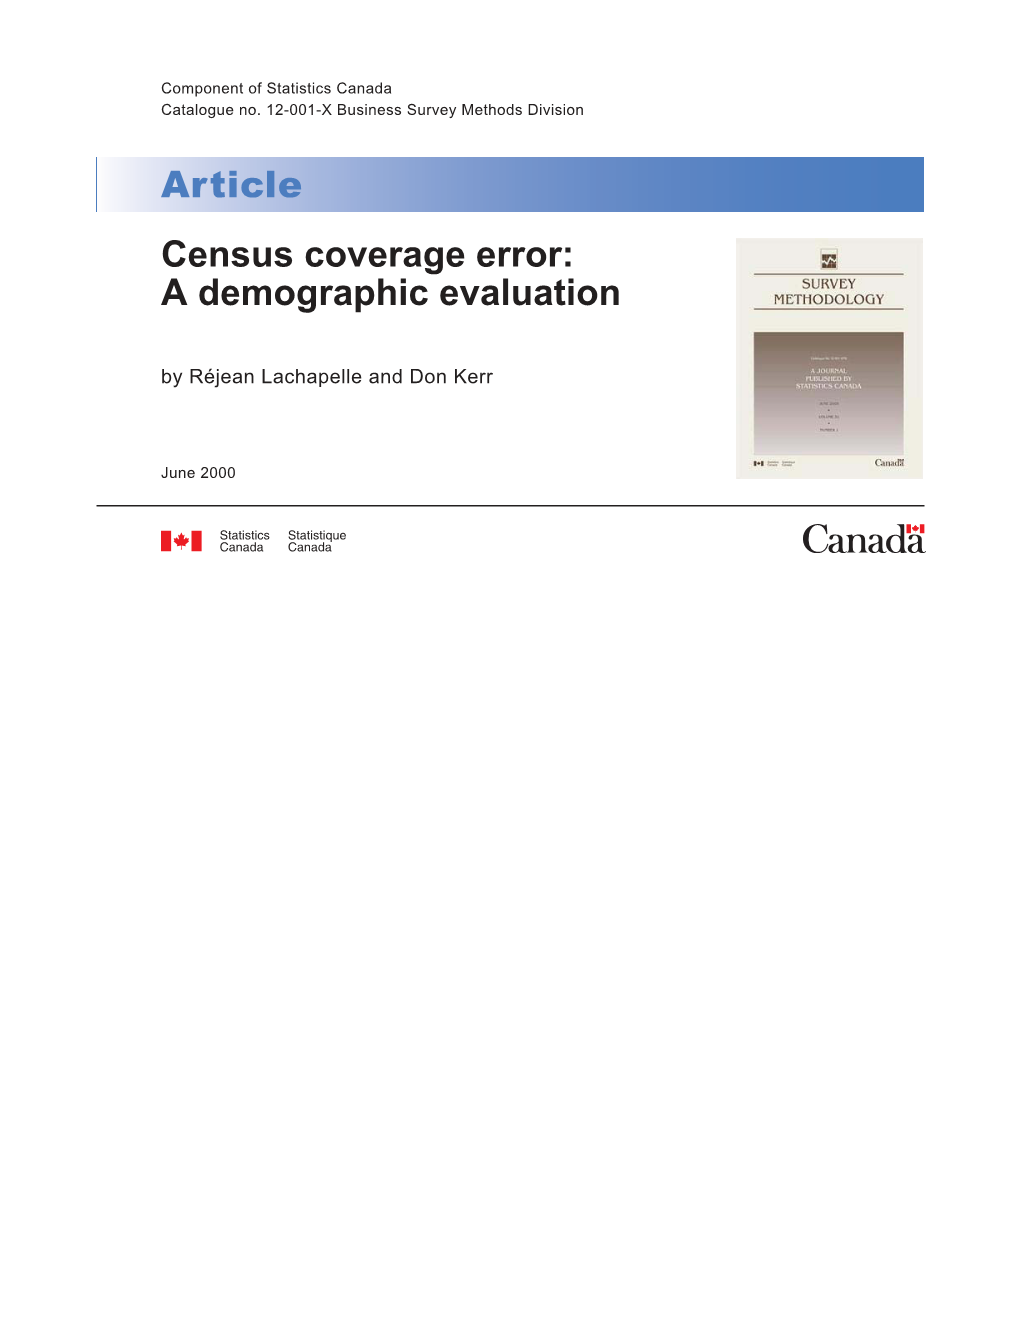 Census Coverage Error: a Demographic Evaluation by Réjean Lachapelle and Don Kerr